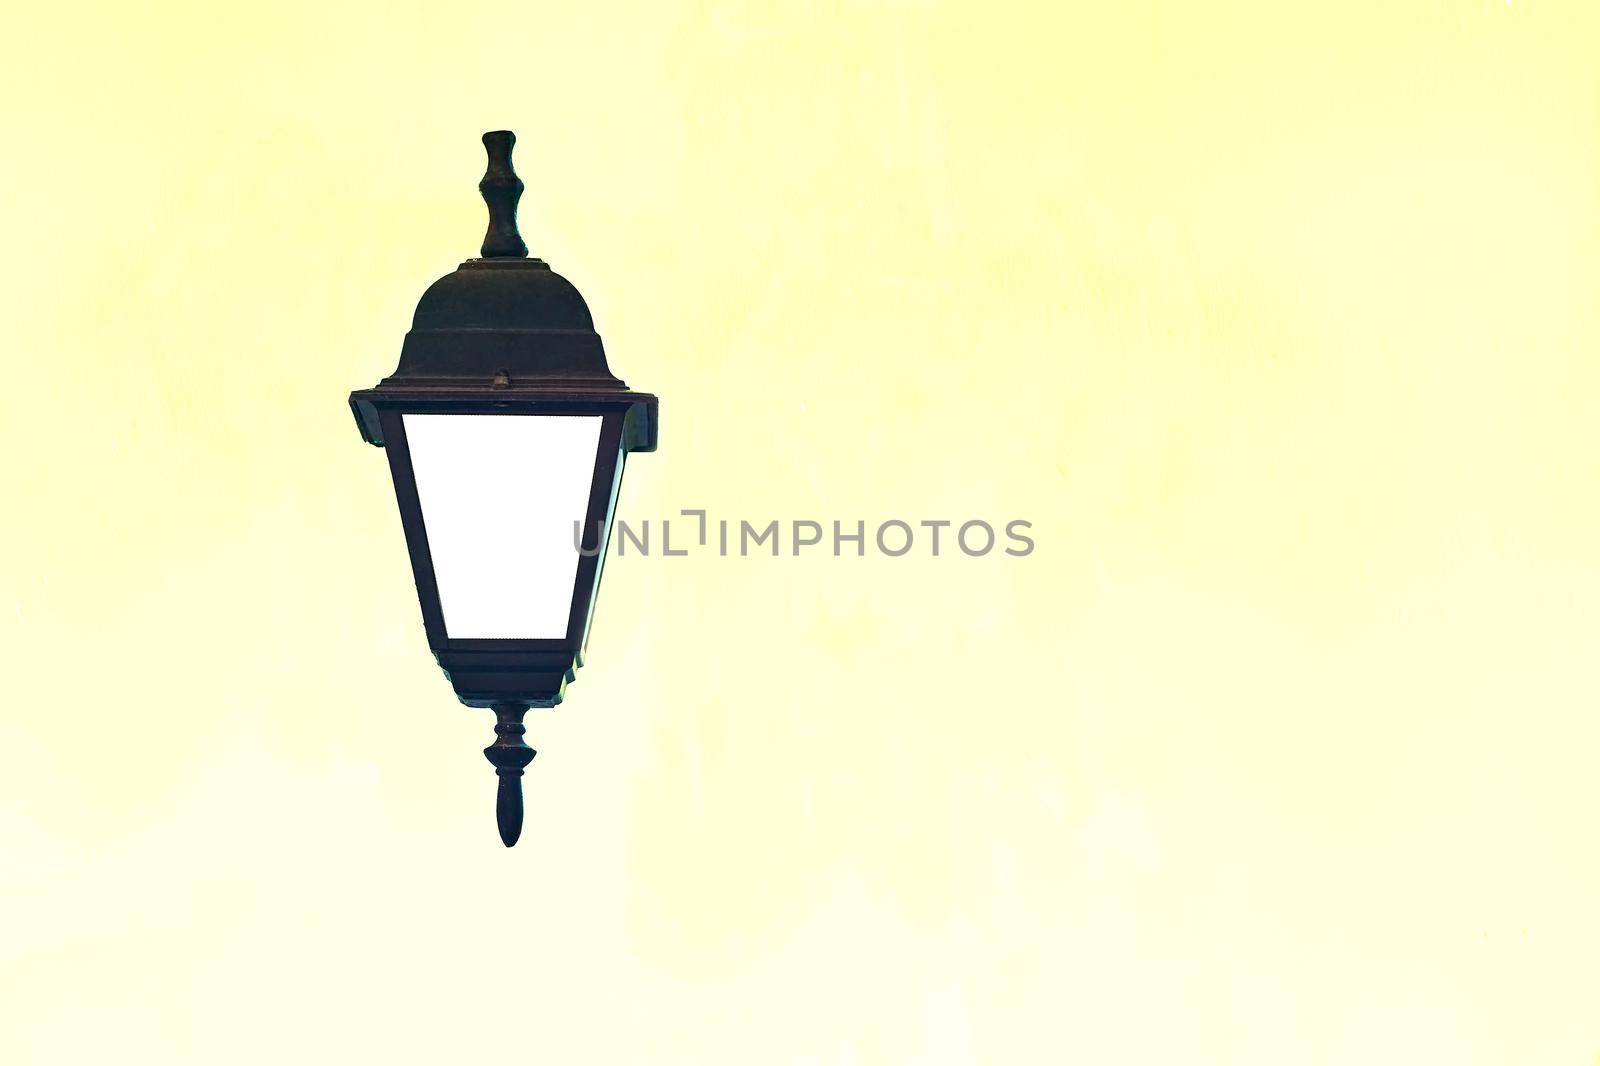 a lamp with a transparent case protecting the flame or electric bulb, and typically having a handle by which it can be carried or hung. Antique black lantern on a pale yellow background